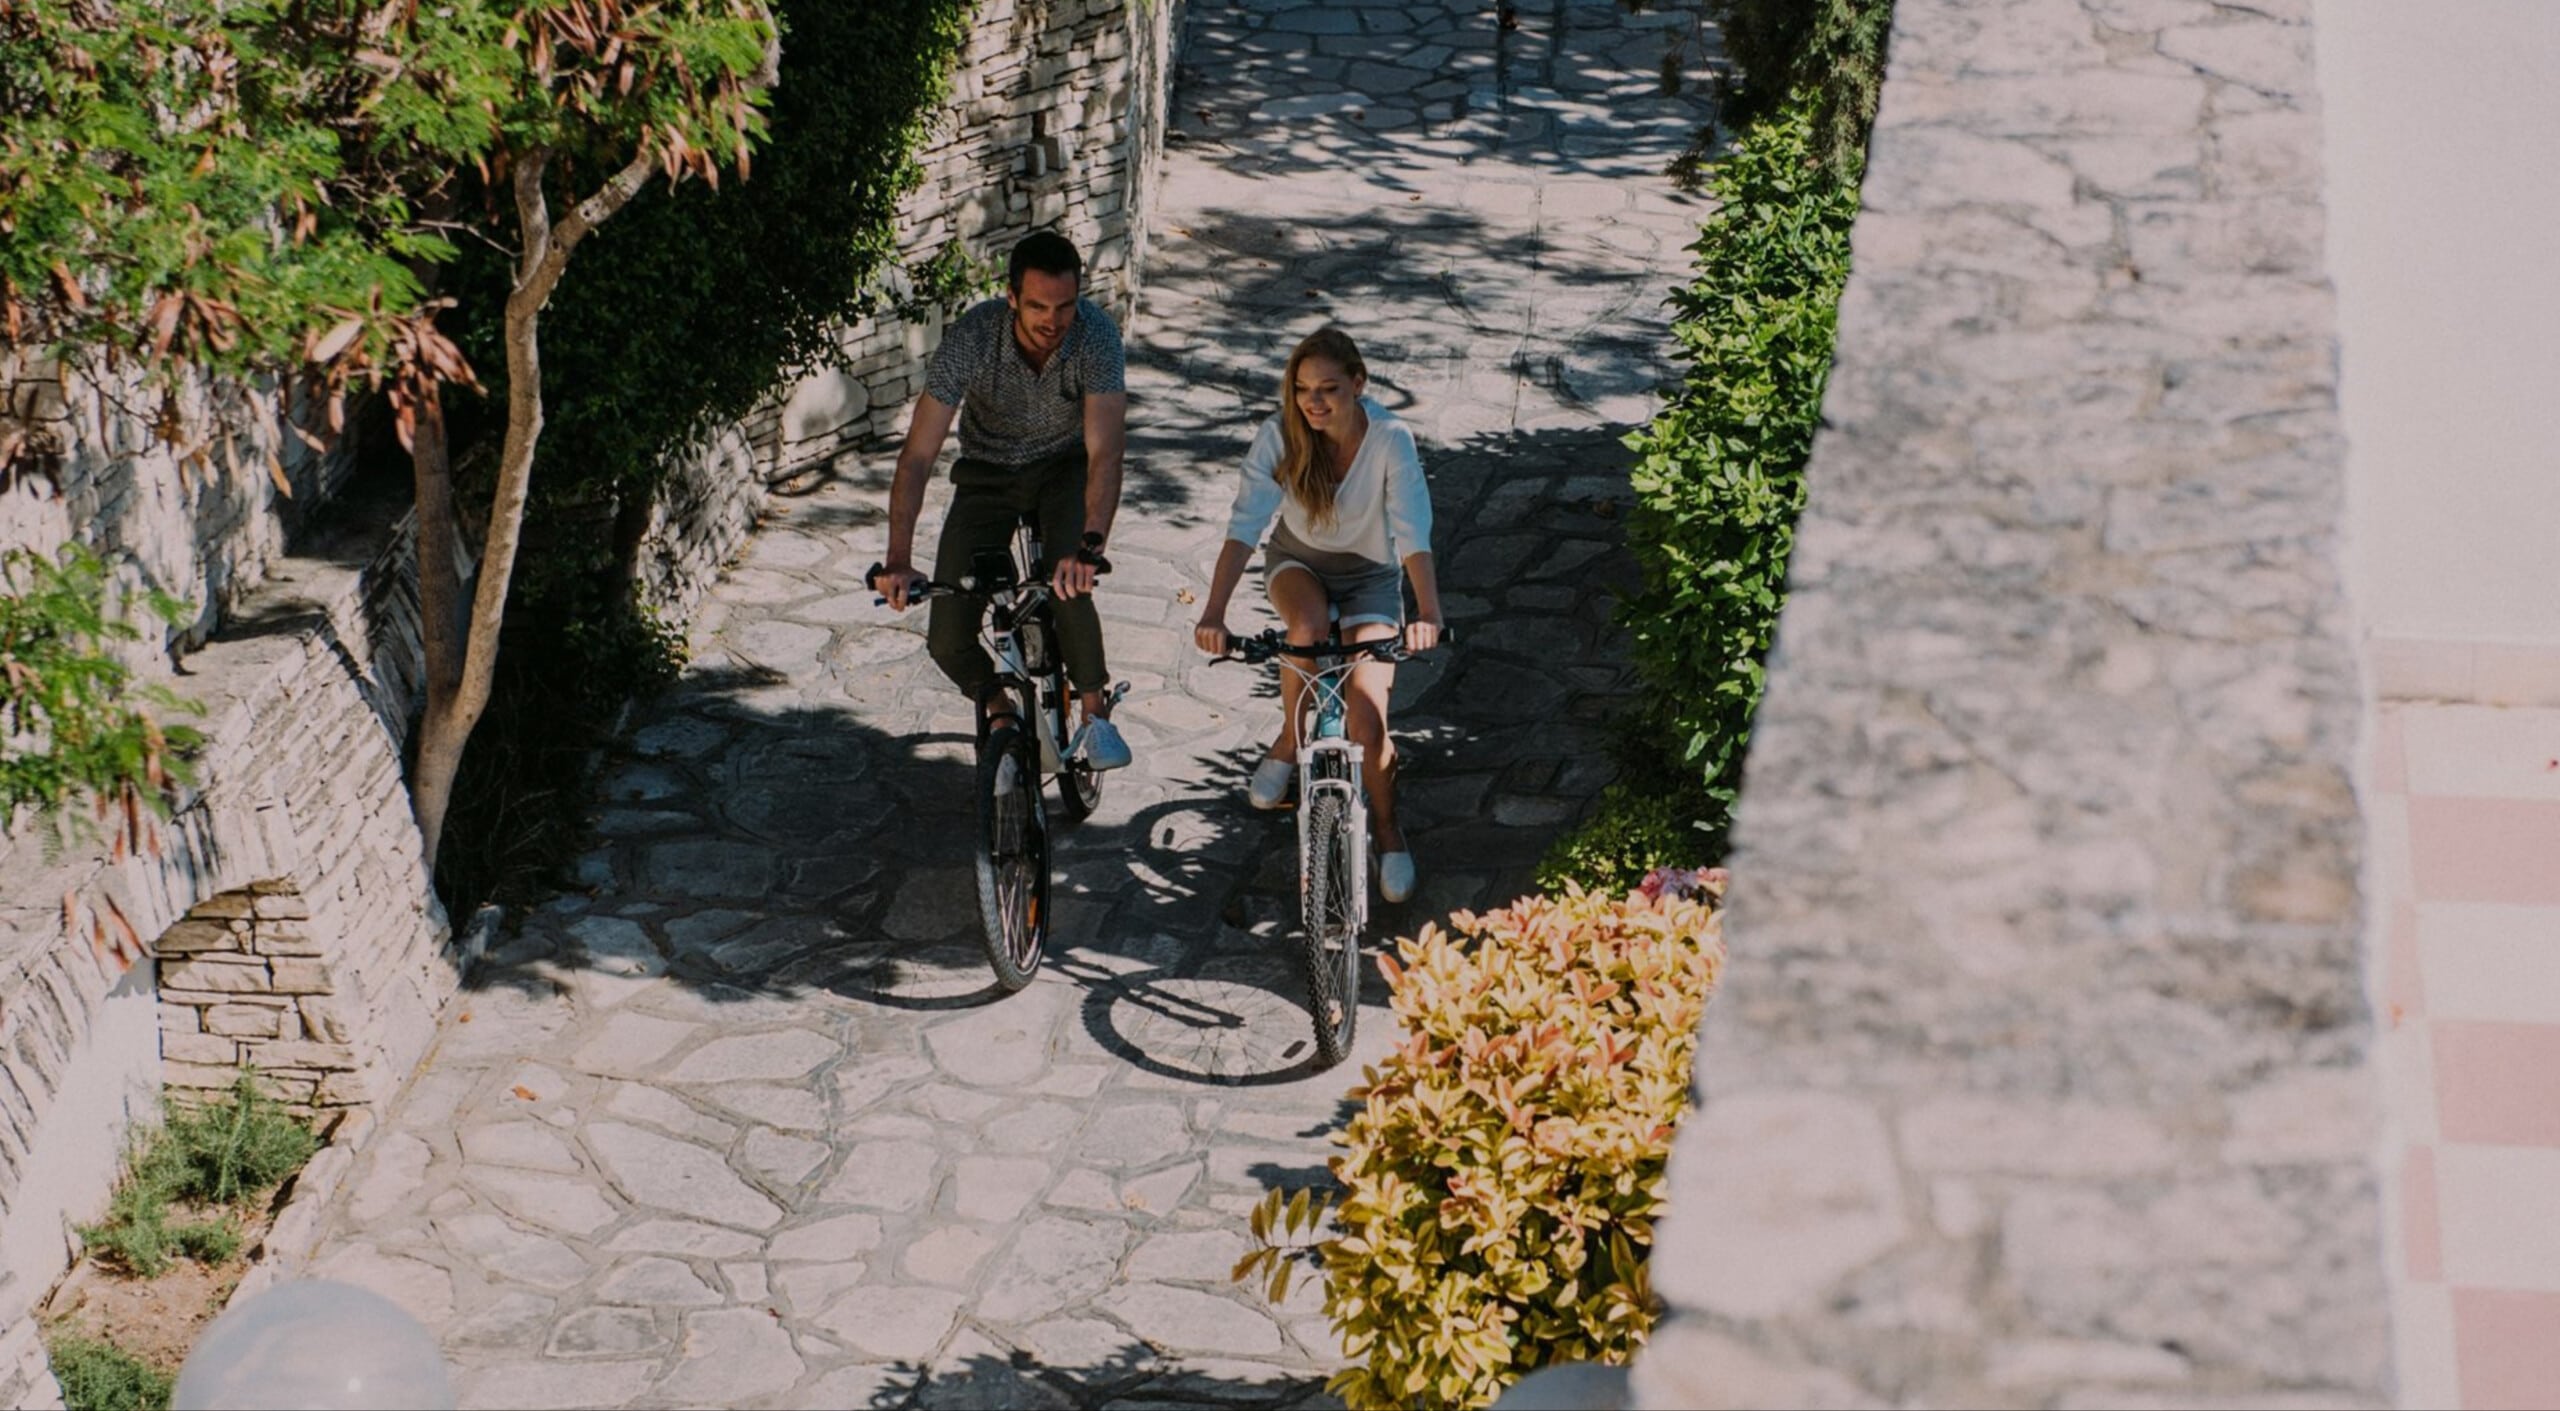 At our luxury hotels in Samos, we promote cycling as the most environmental way of getting around